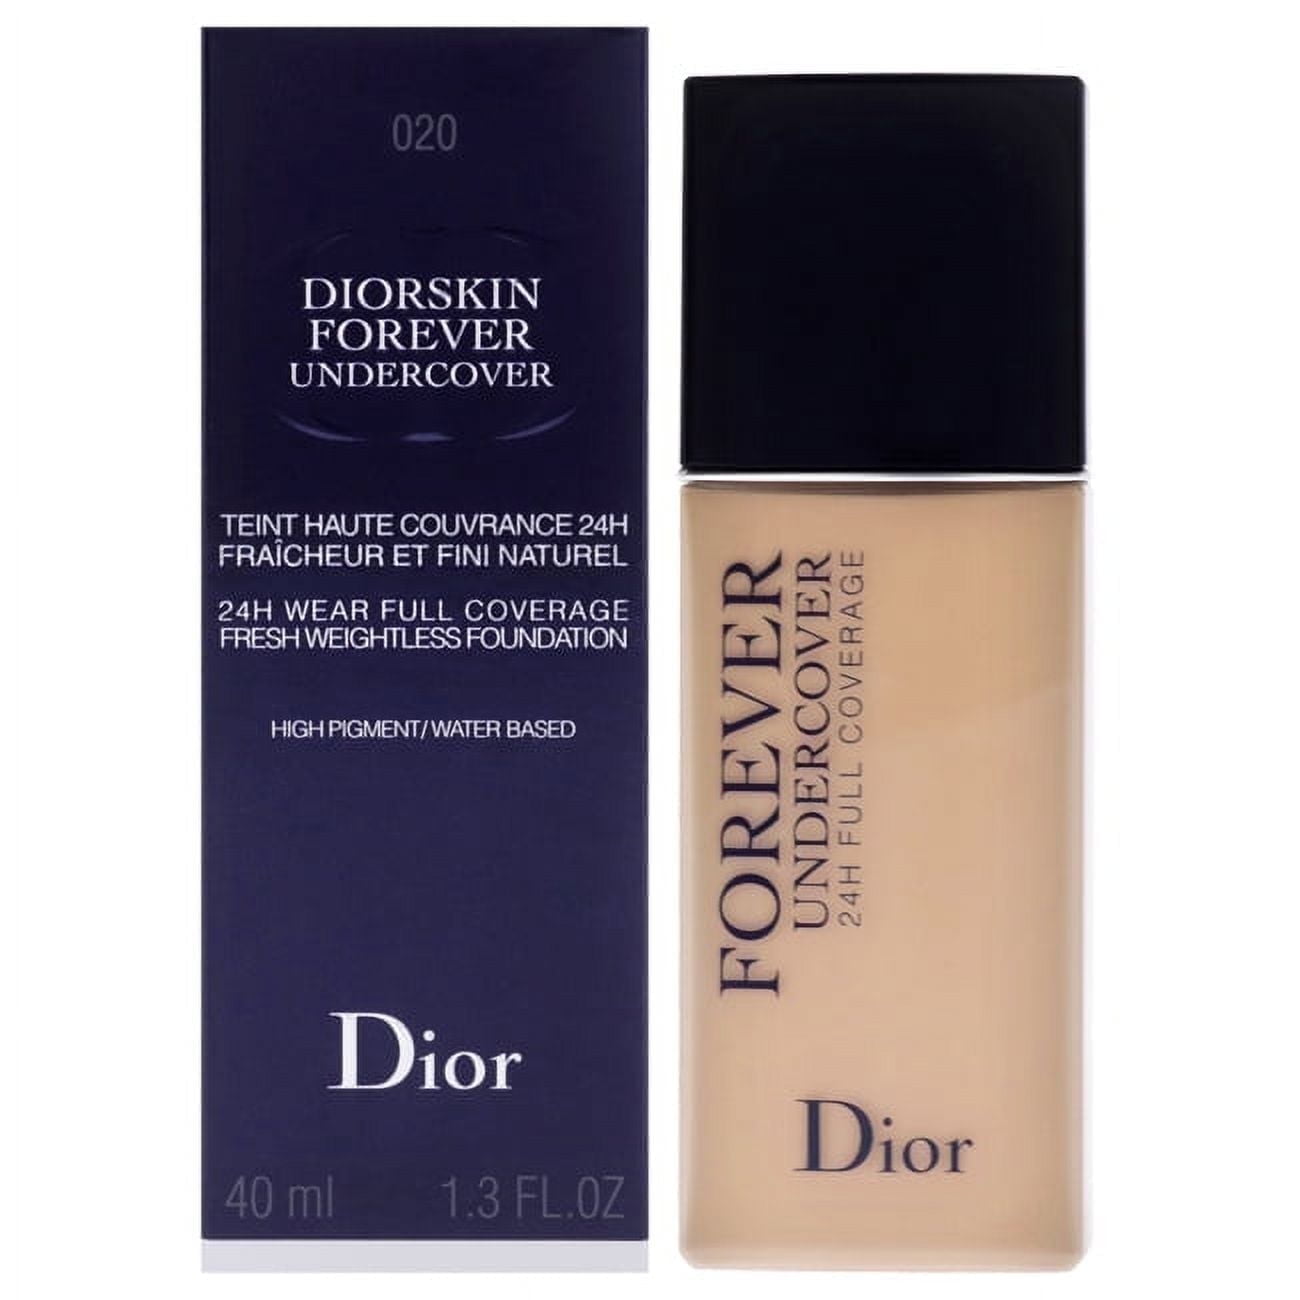 Diorskin Forever Undercover Foundation - 020 Light Beige by Christian Dior  for Women - 1.3 oz Foundation